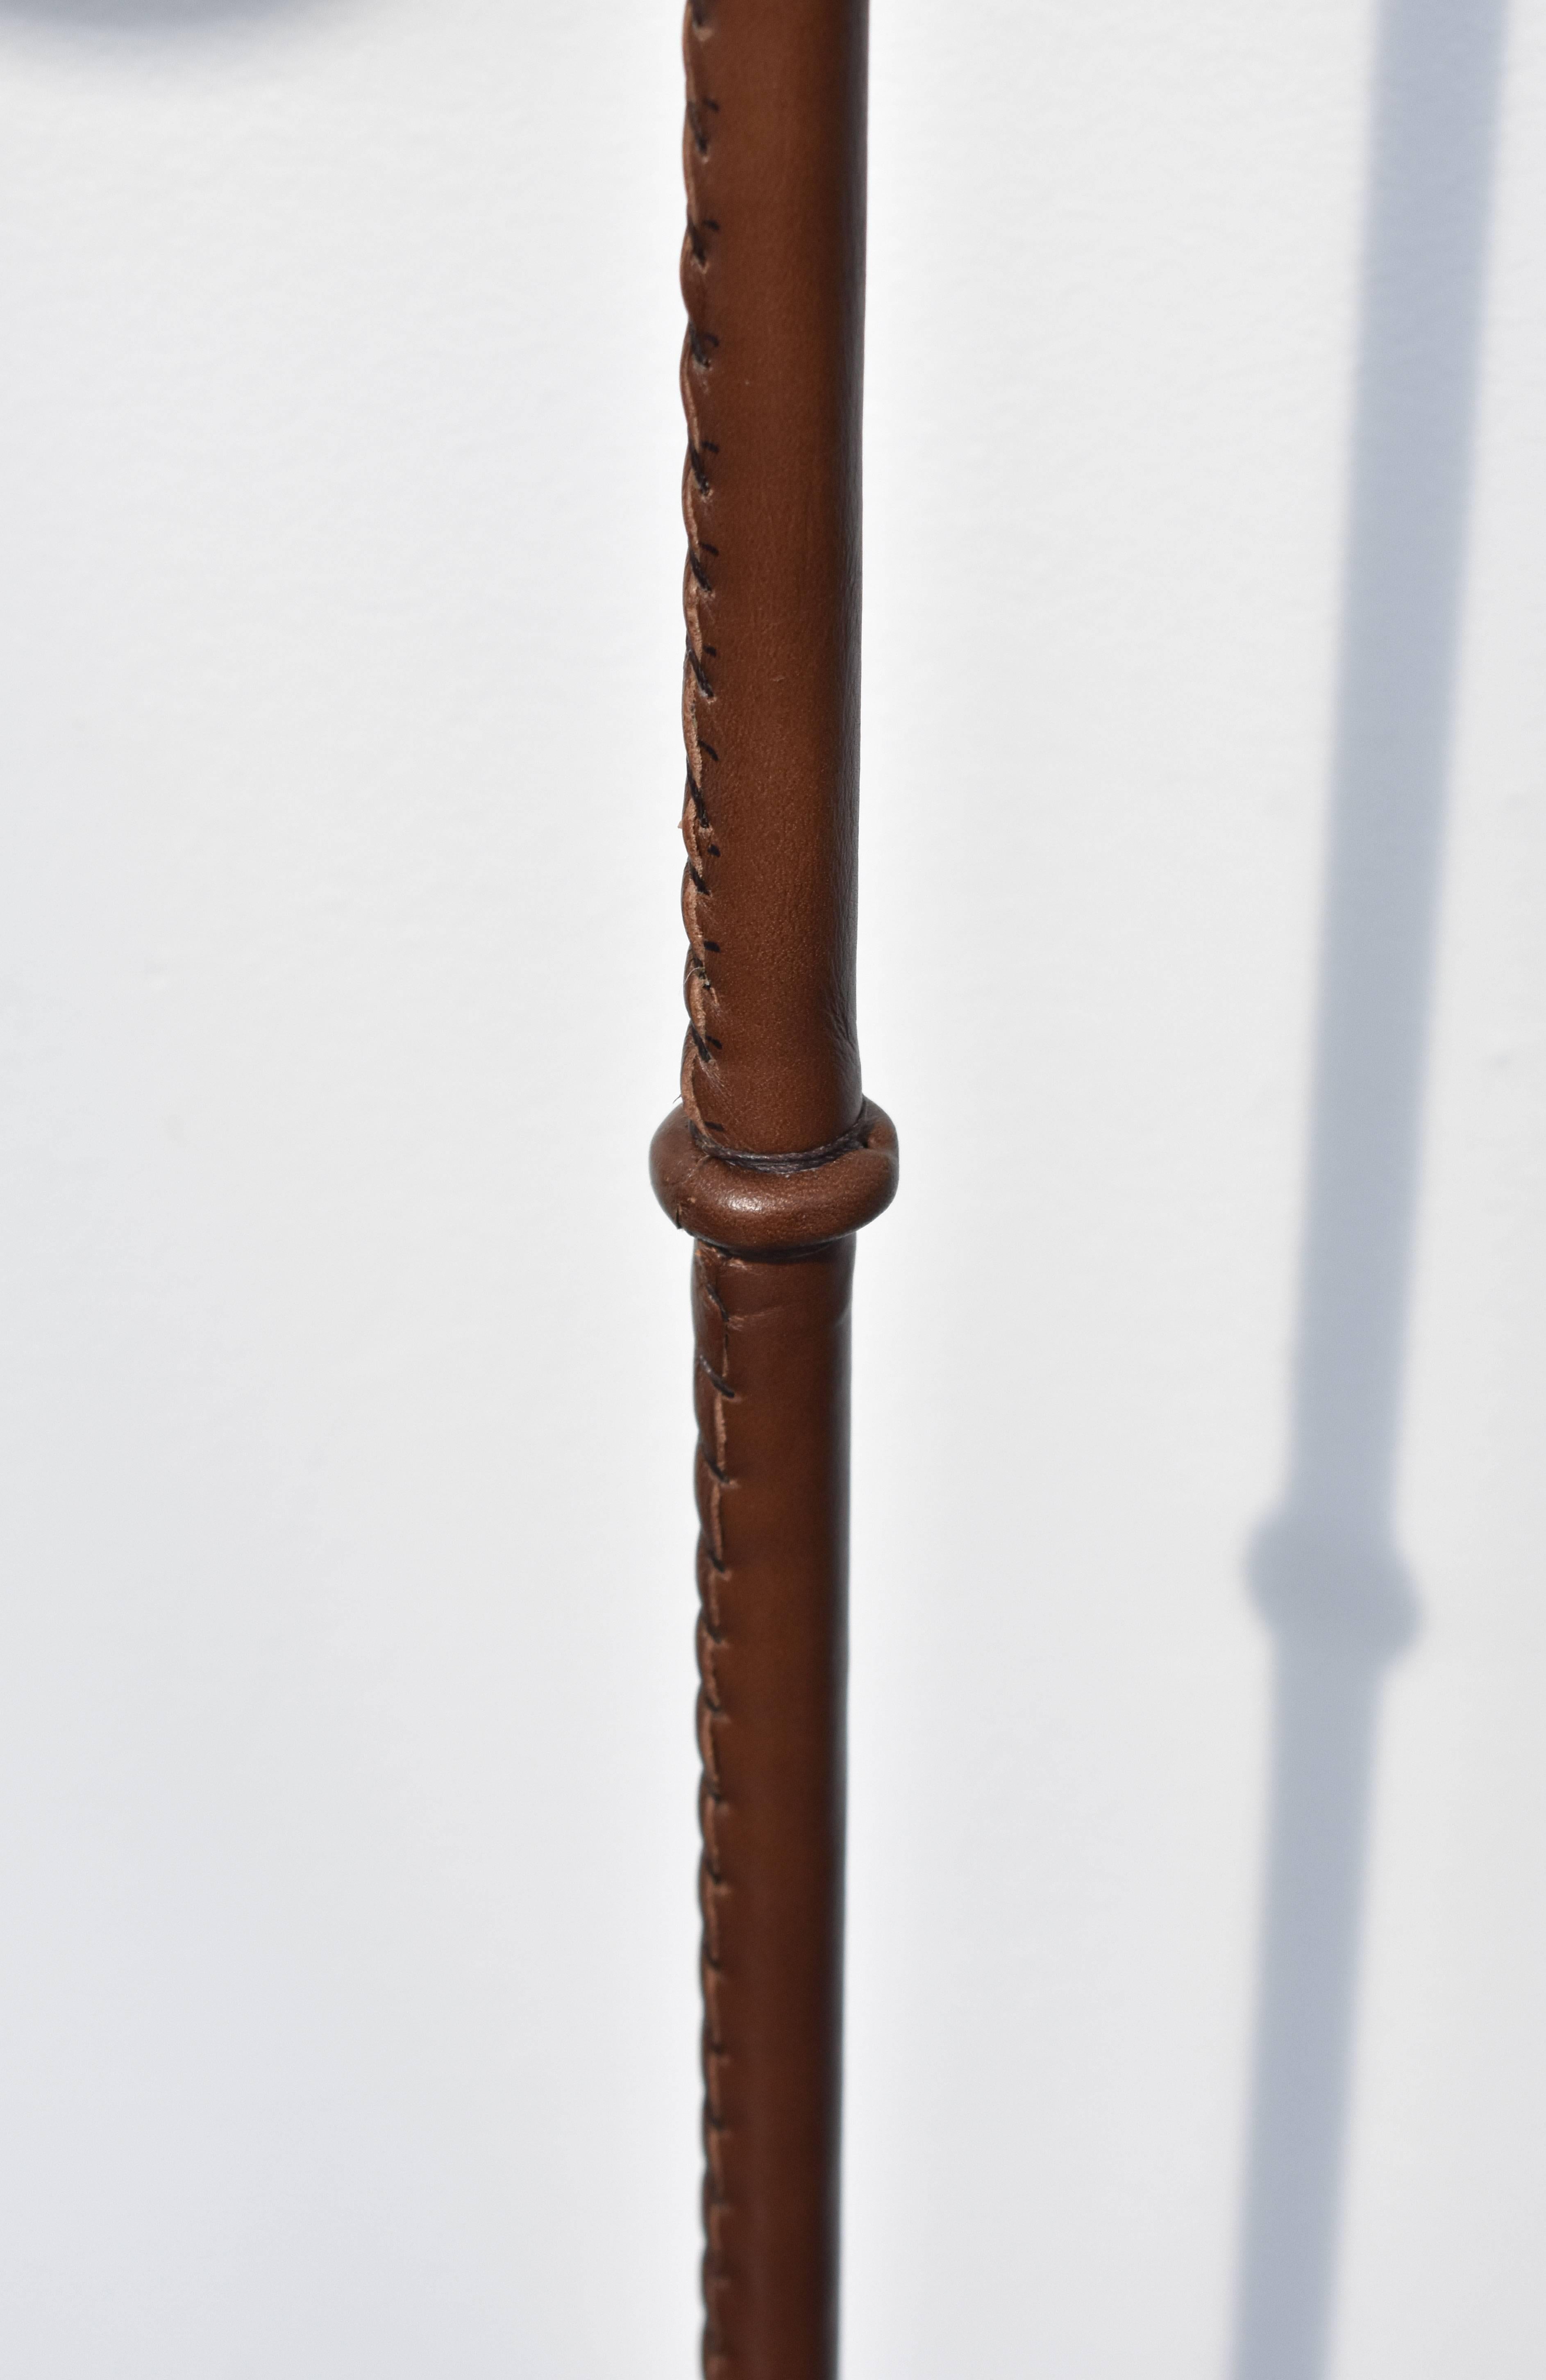 Jacques Adnet Style Floor Lamp in Dark Brown Saddle-Stitched Leather, 1950s (Französisch)